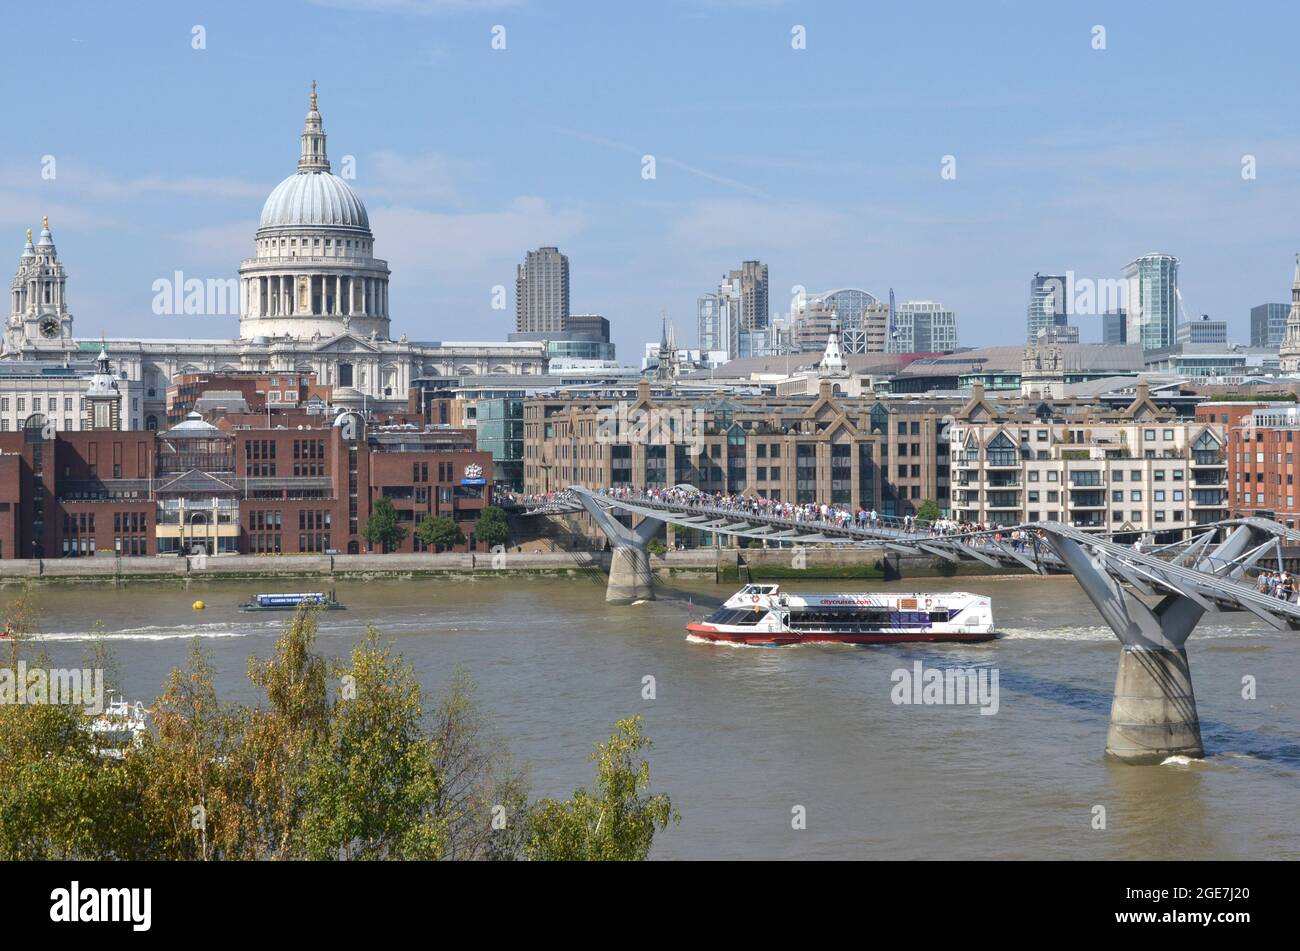 LONDON, UNITED KINGDOM - Jul 25, 2021: An aerial view of the Millenium bridge and St.Pauls on River Thames, London Stock Photo